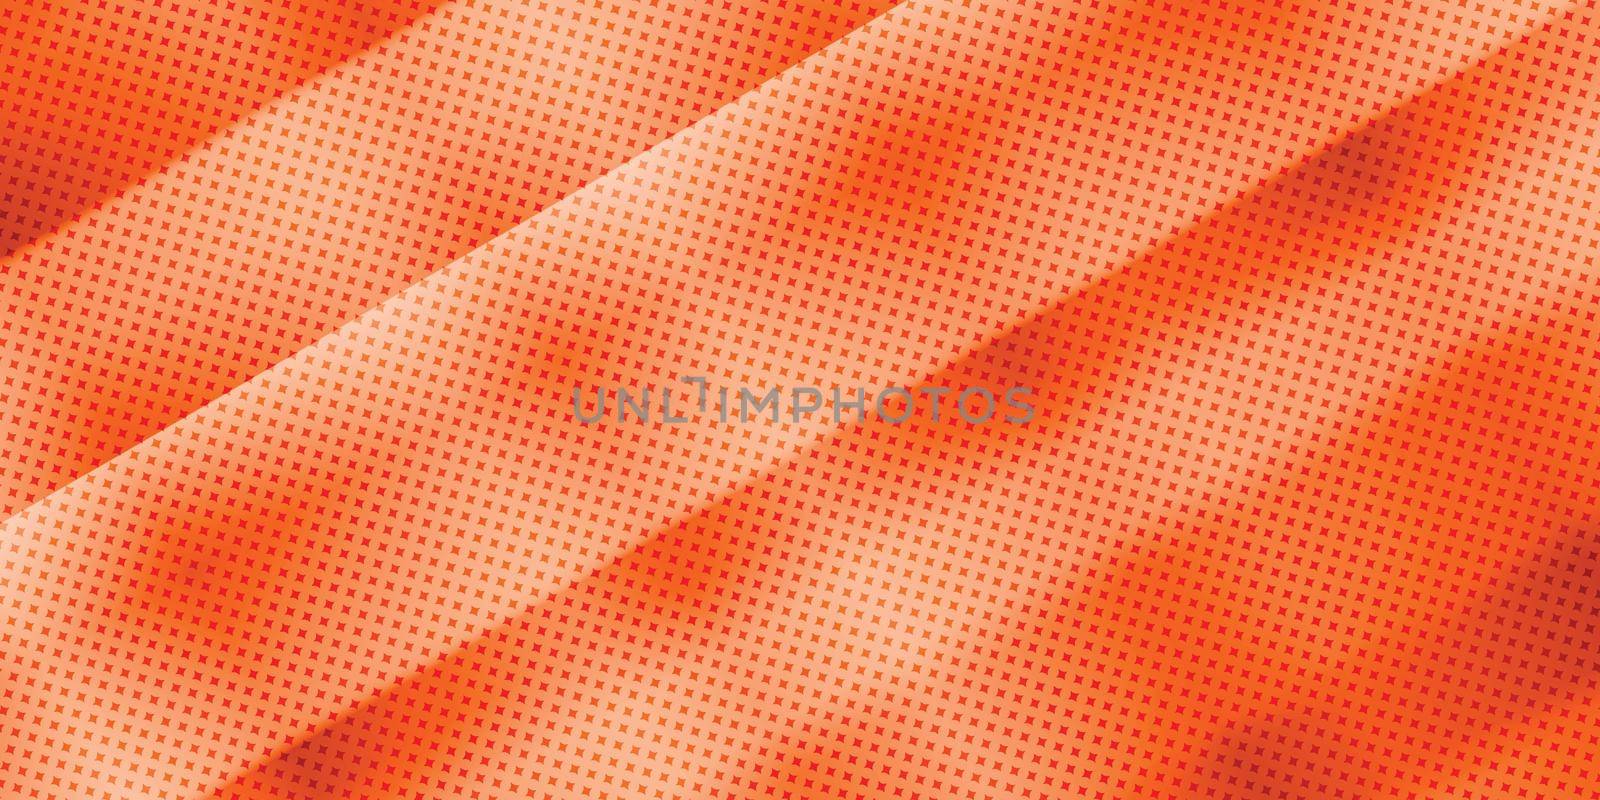 90-s style. Creative illustration in halftone style with orange gradient. Abstract colorful geometric background. Pattern for wallpaper, web page, textures by allaku